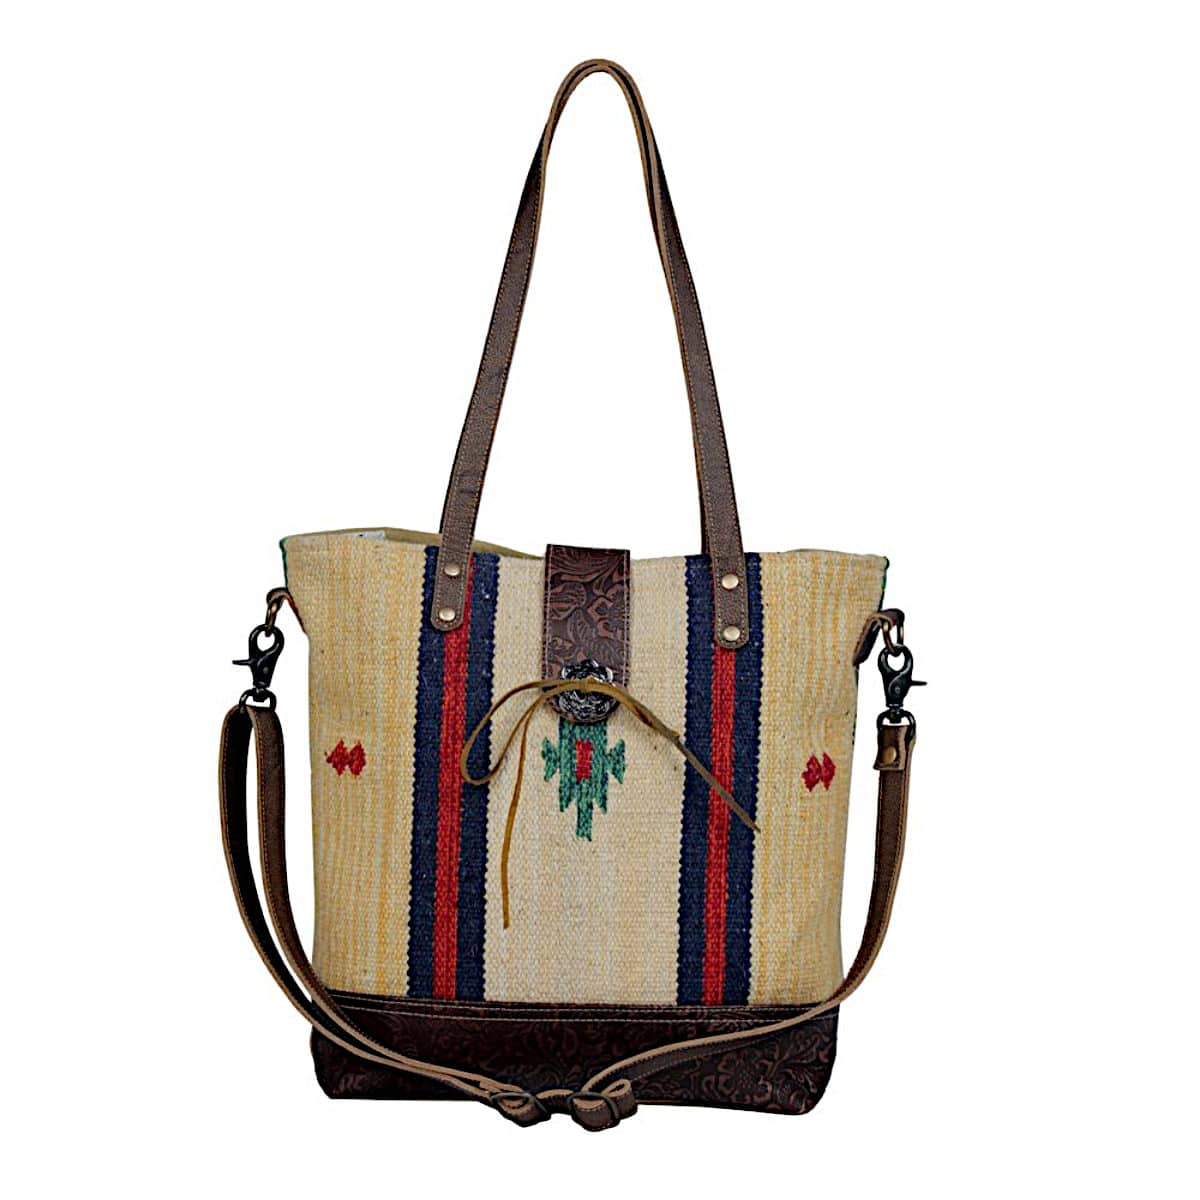 Vintage Square Crossbody Bag with Embossed Pattern and Adjustable